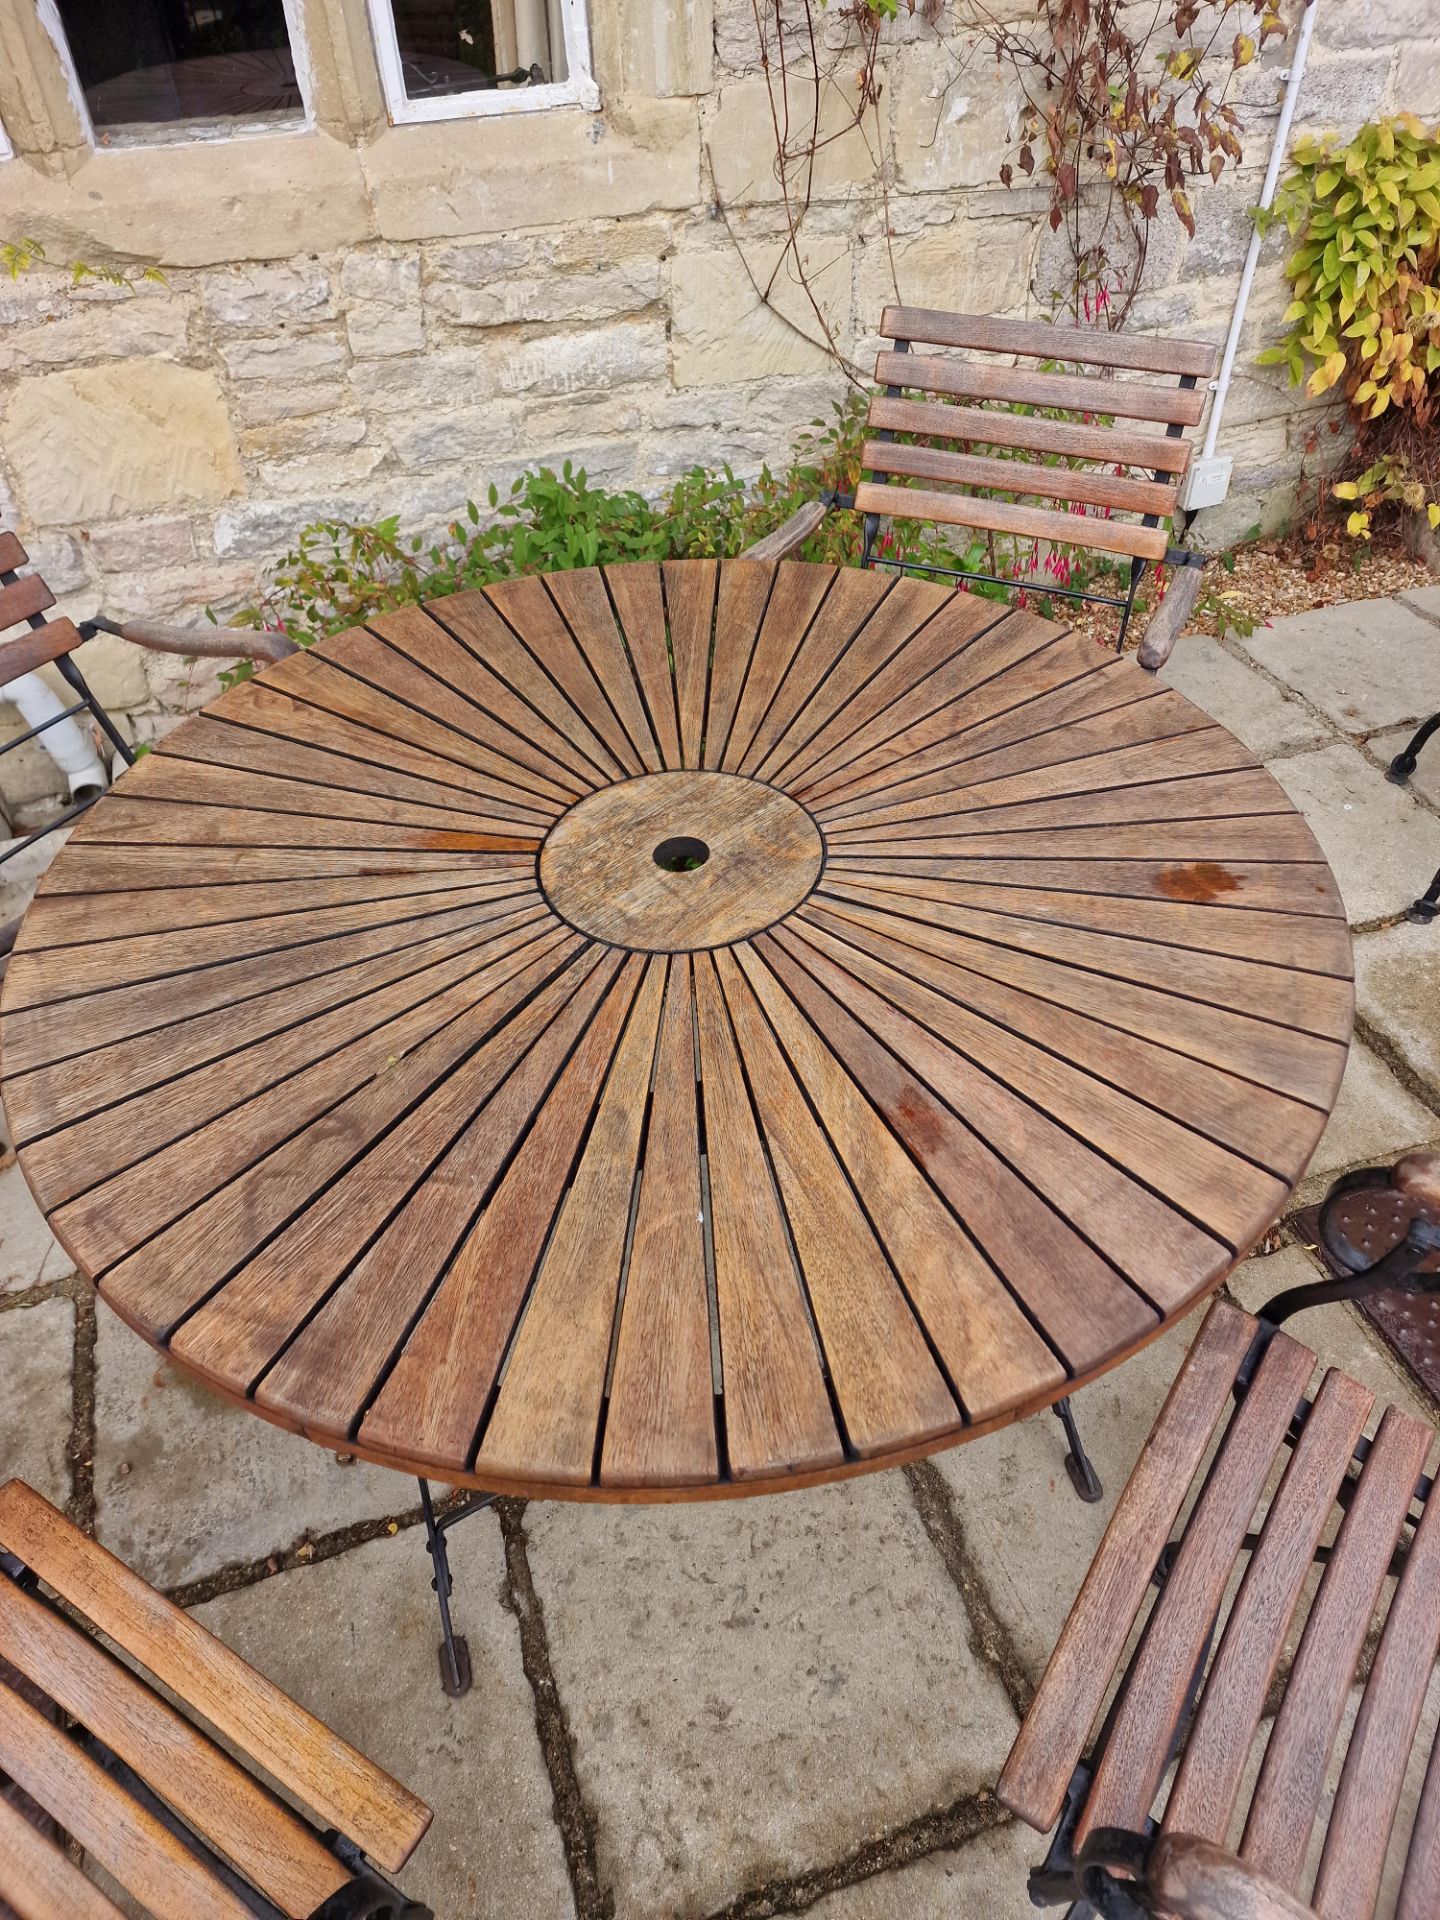 Danish Sunburst Teak Garden Table On Metal Legs Complete With 4 x Armchairs On A Foldable Cast - Image 2 of 2